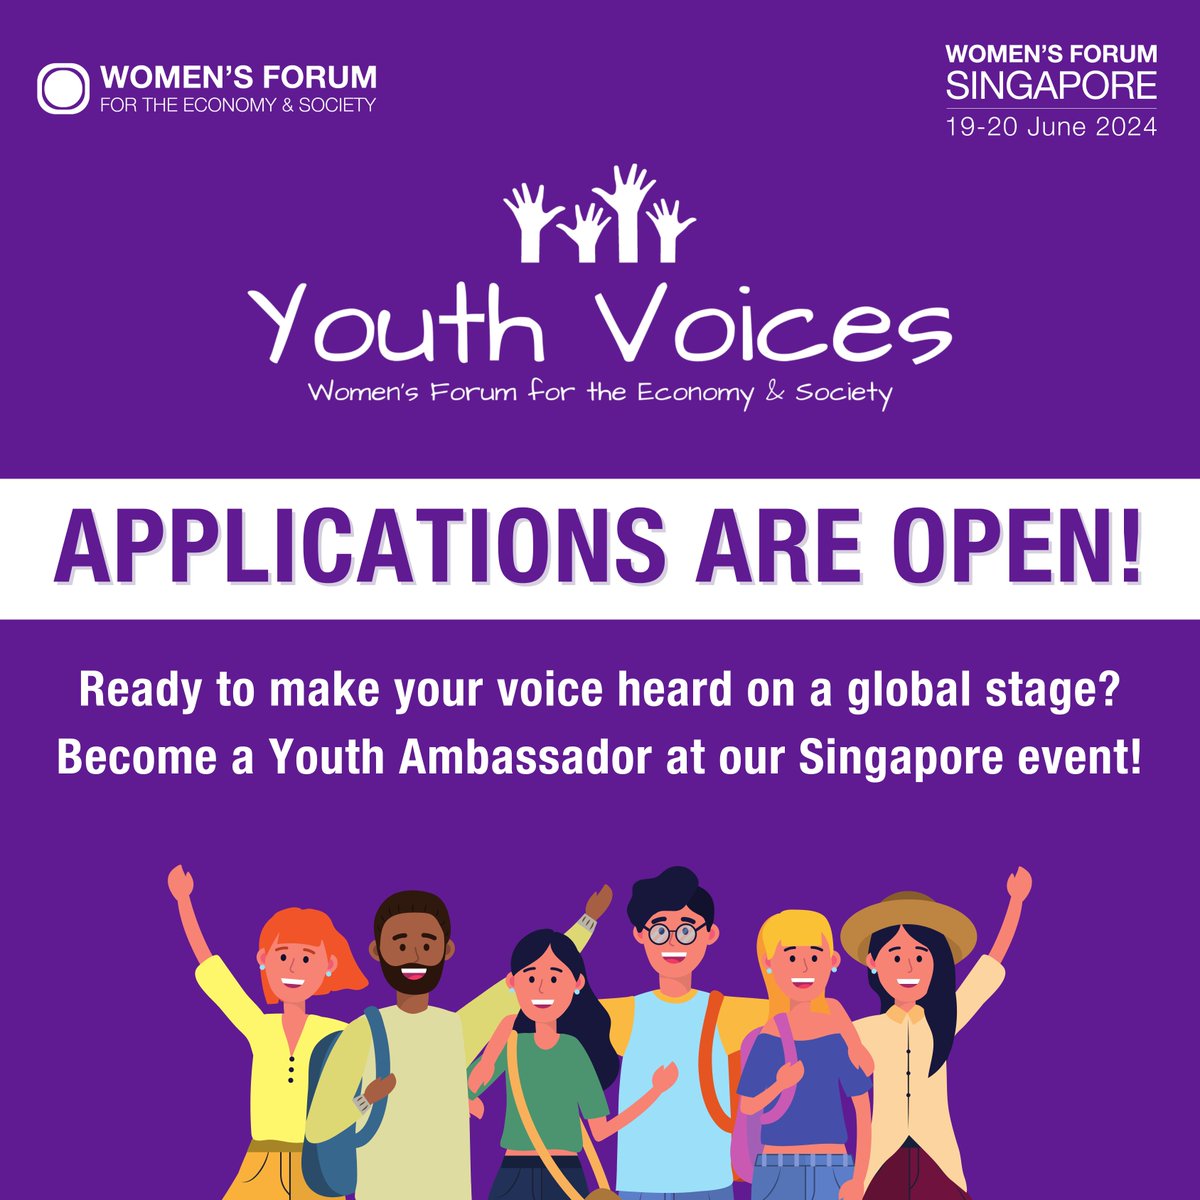 Applications to be a Youth Ambassador at our upcoming event in Singapore, on June 19-20, 2024, are now open! If you're between 18-27 years old, passionate about gender equality and want your voice heard on an international stage, apply today here: content.womens-forum.com/youthvoices-ap…